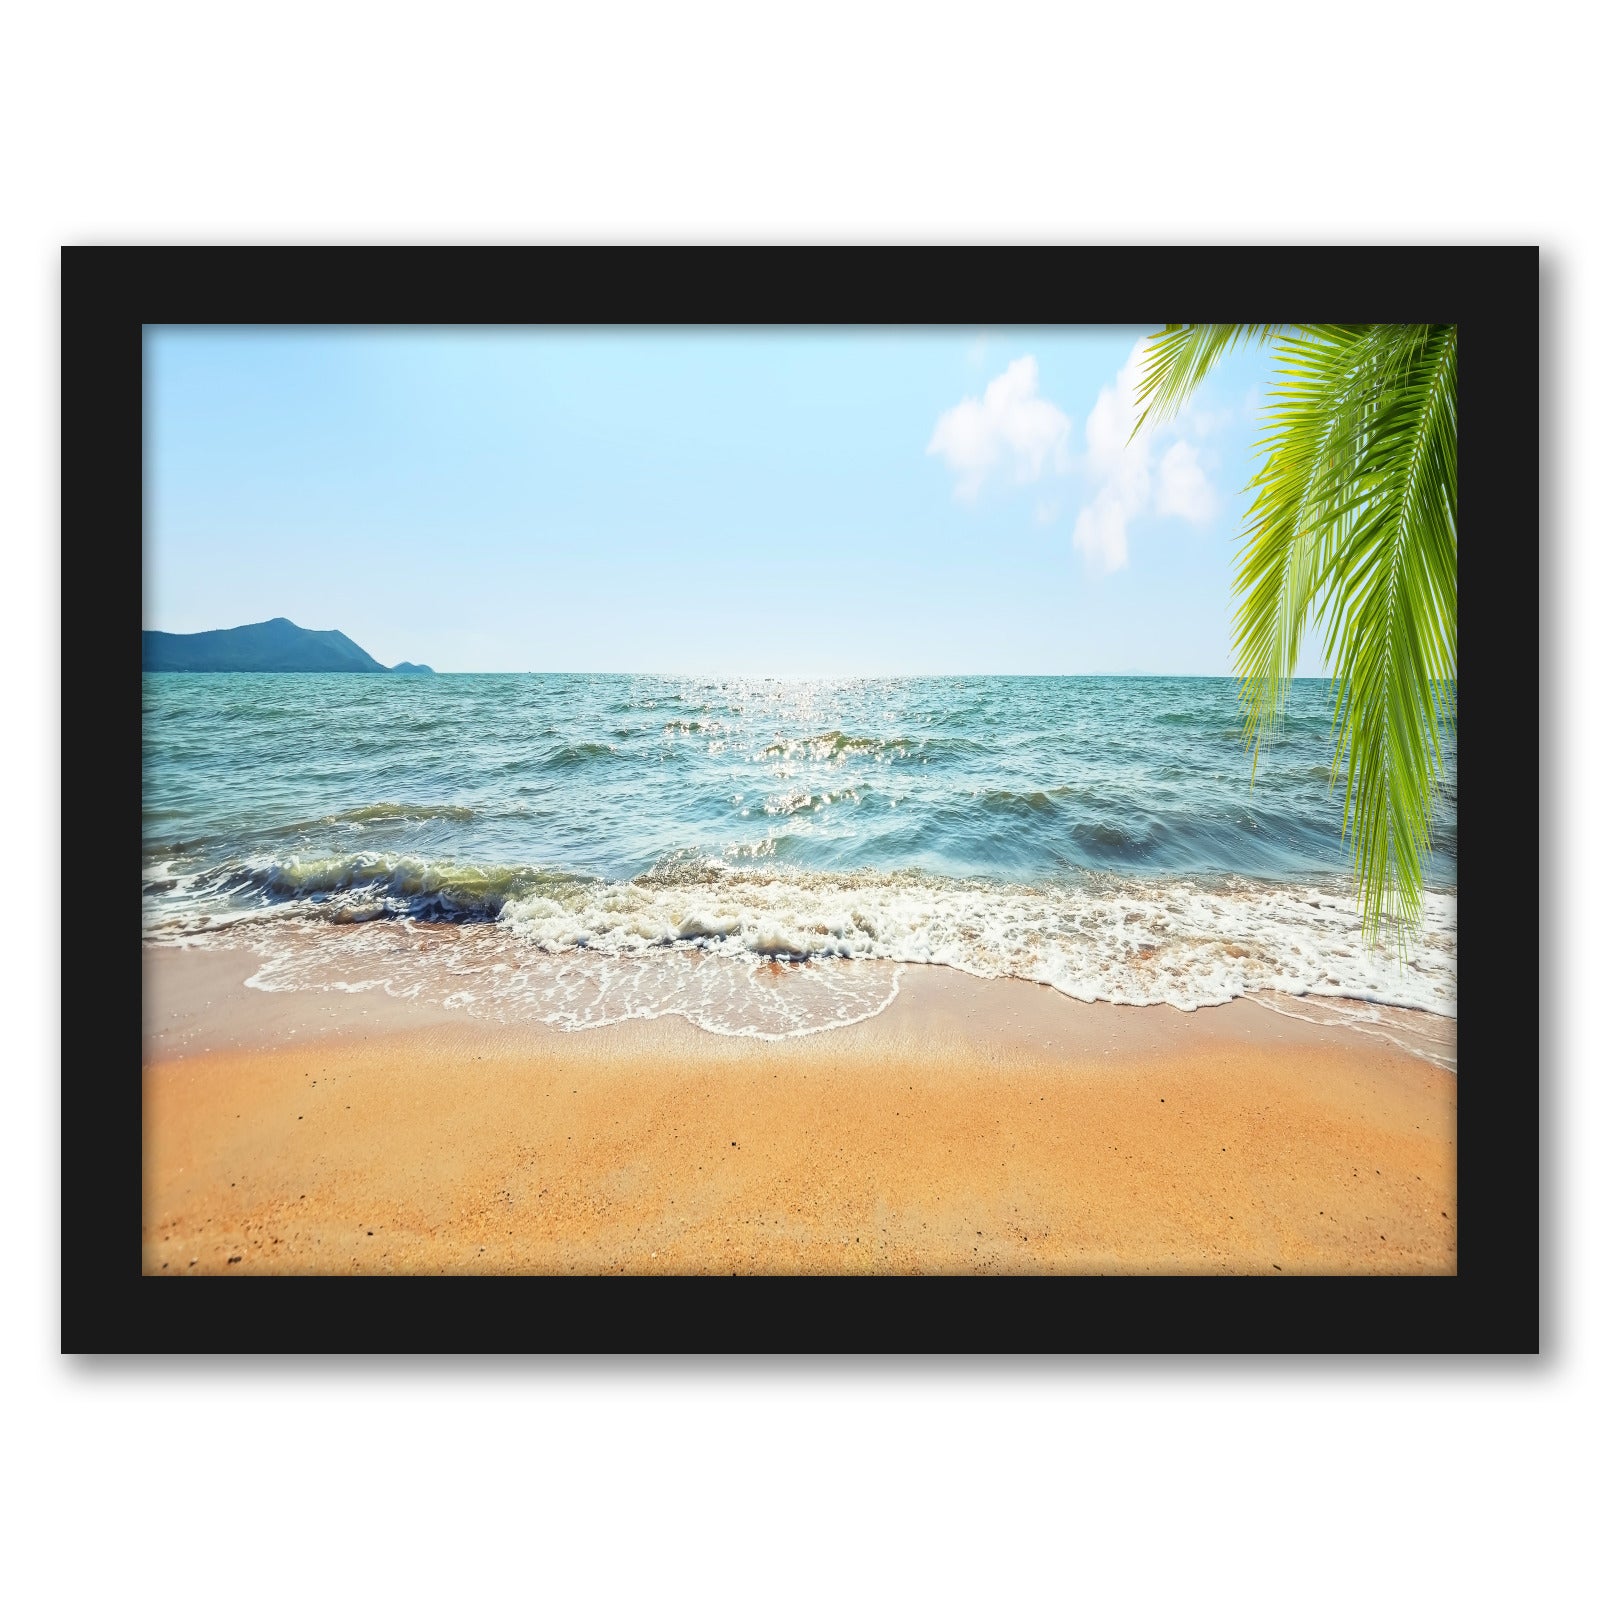 Tropical Island by Manjik Pictures  - Framed Print